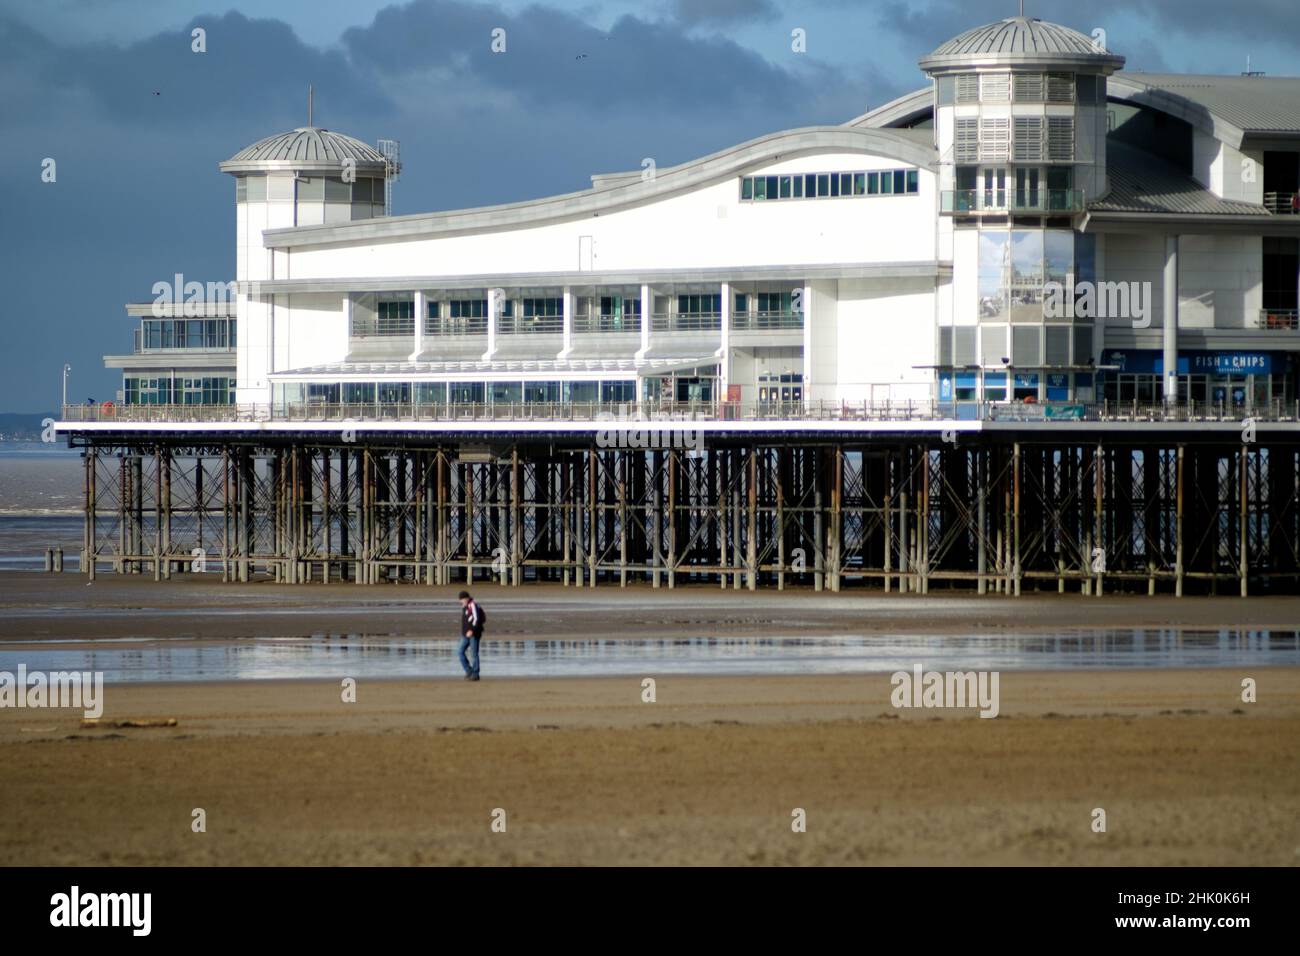 An image of the grand Pier at Weston-s-Mare, UK. The pier has been renovated in recent years and has a new modern design by architects Angus Meek Stock Photo